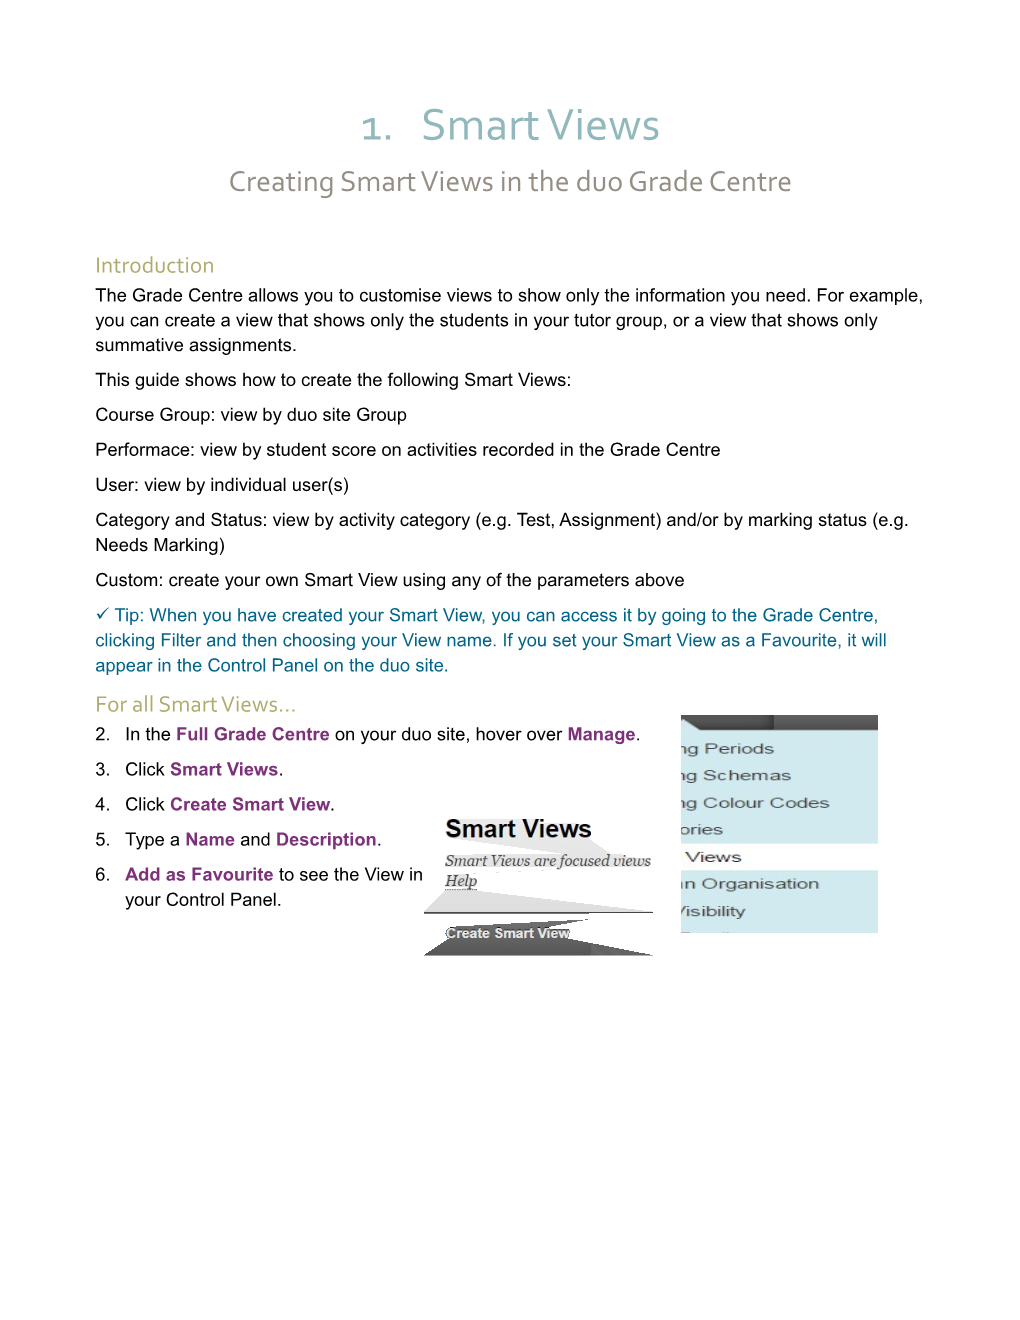 Creating Smart Views in the Duo Grade Centre